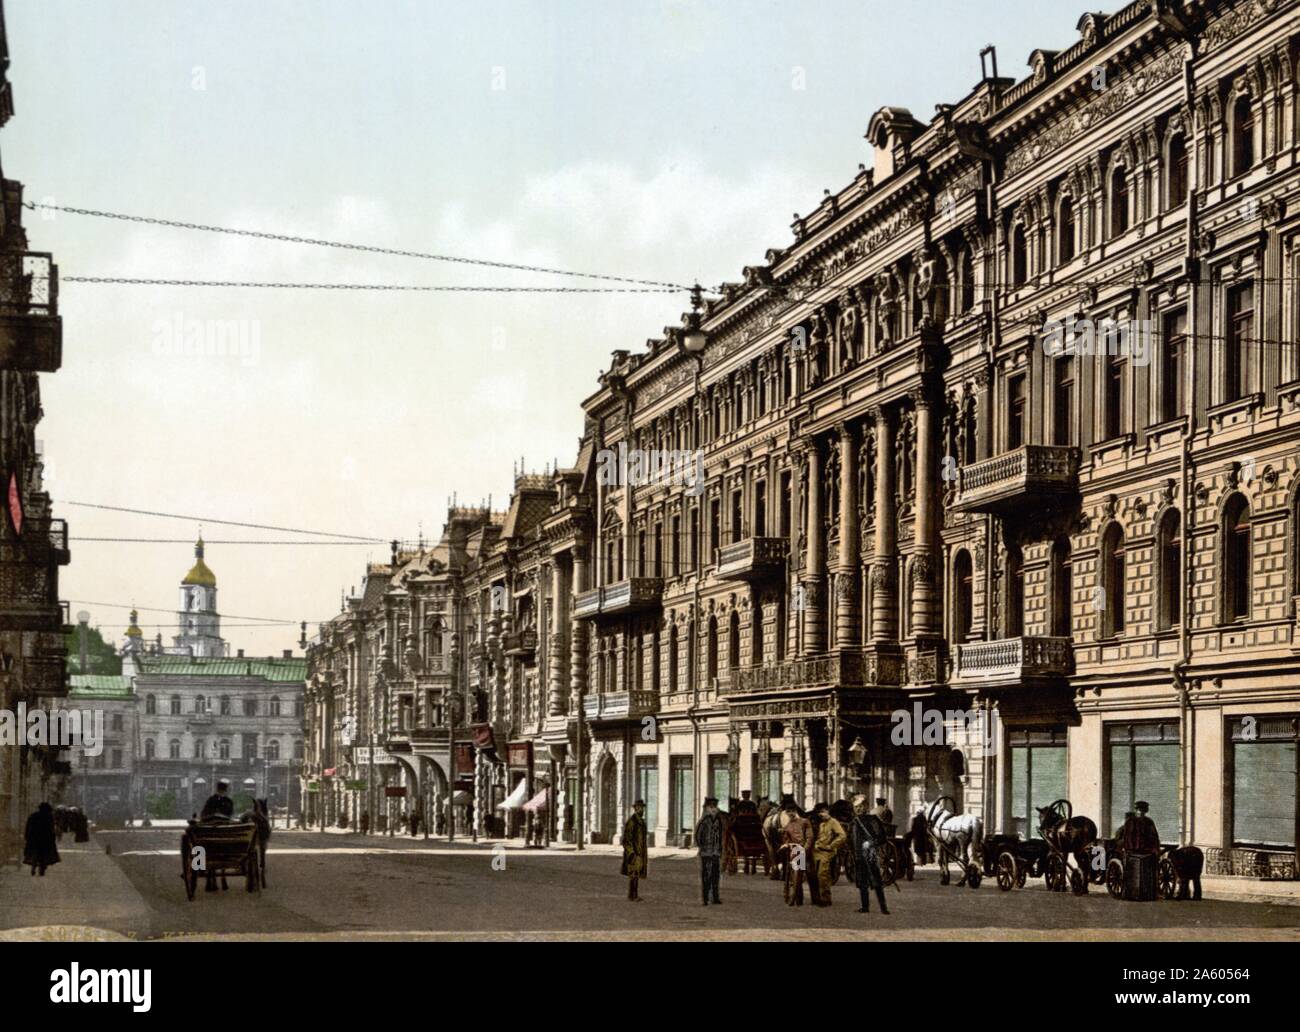 Early colour photography, Street scene of Nicolviewskaia, (also known as Nikolaevskaia) Kiev, Russia 1890. As of 1919 Ukraine became independent and Kiev is now the capital the country. Stock Photo